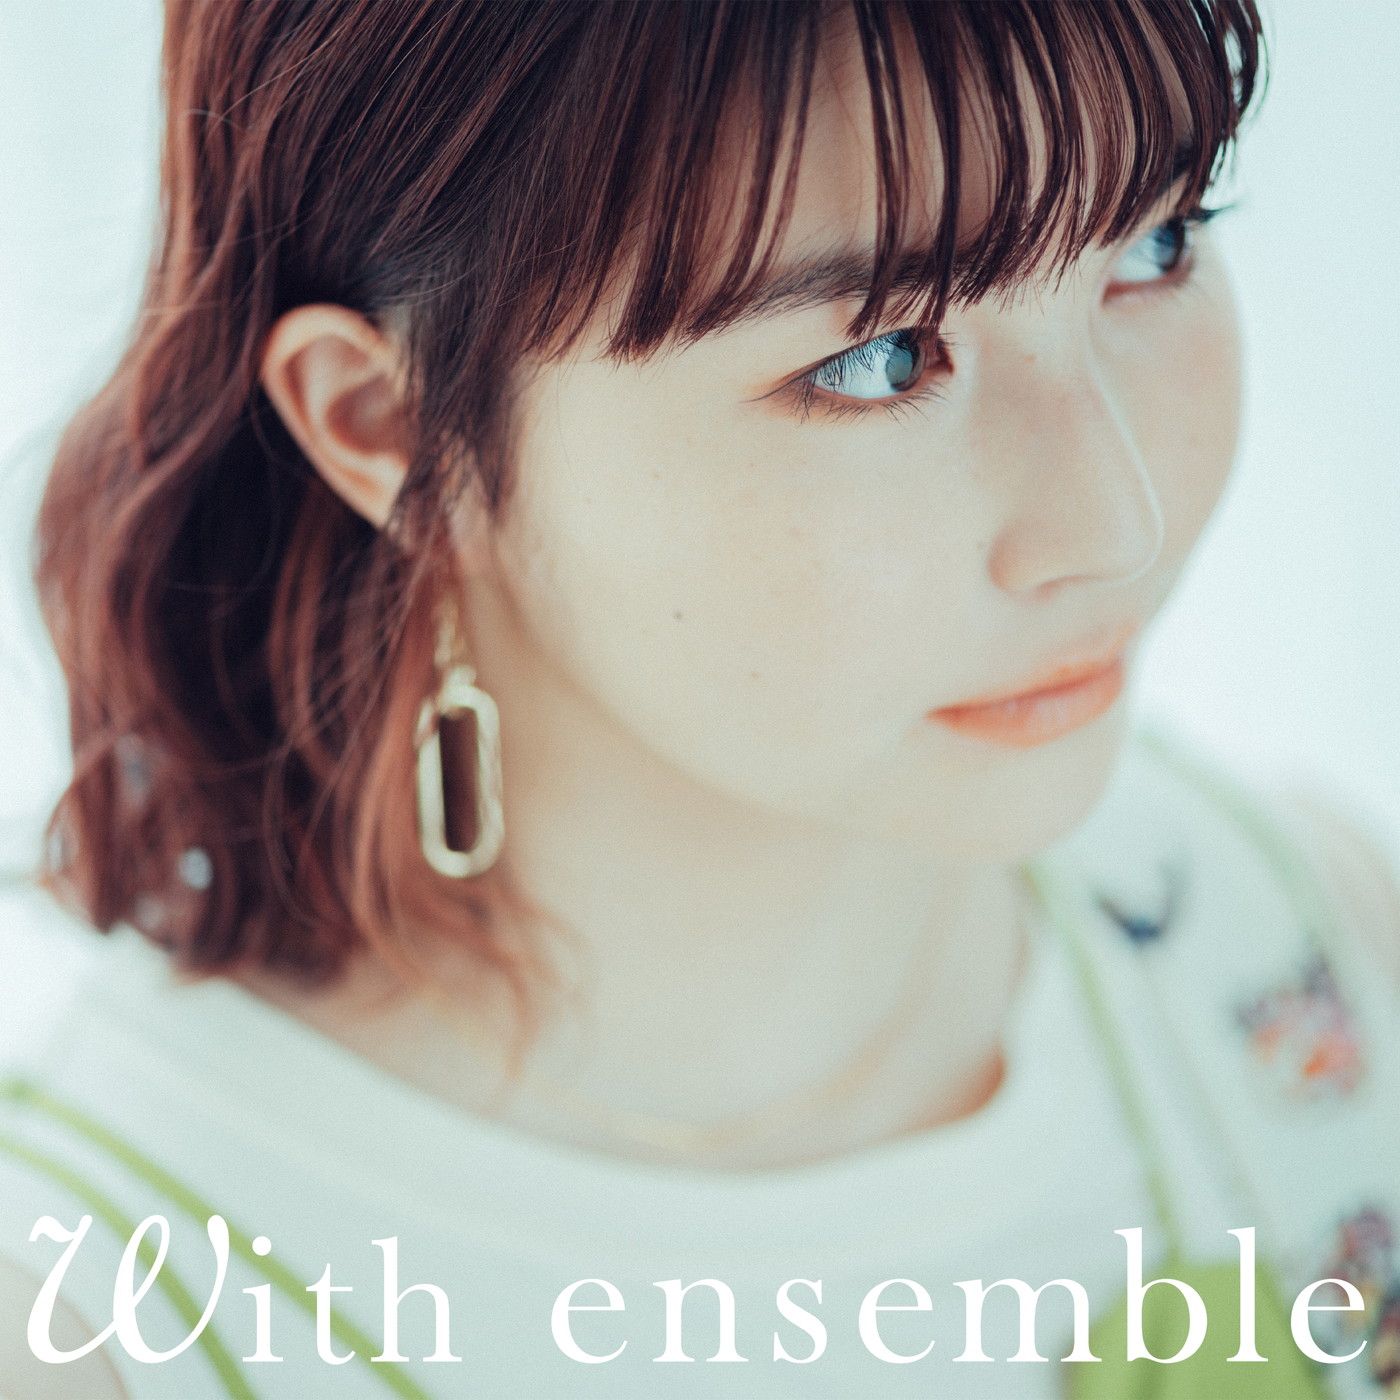 YouTubeチャンネル『With ensemble』より、CHEMISTRY、坂口有望のパフォーマンス音源配信決定 - 画像一覧（3/5）